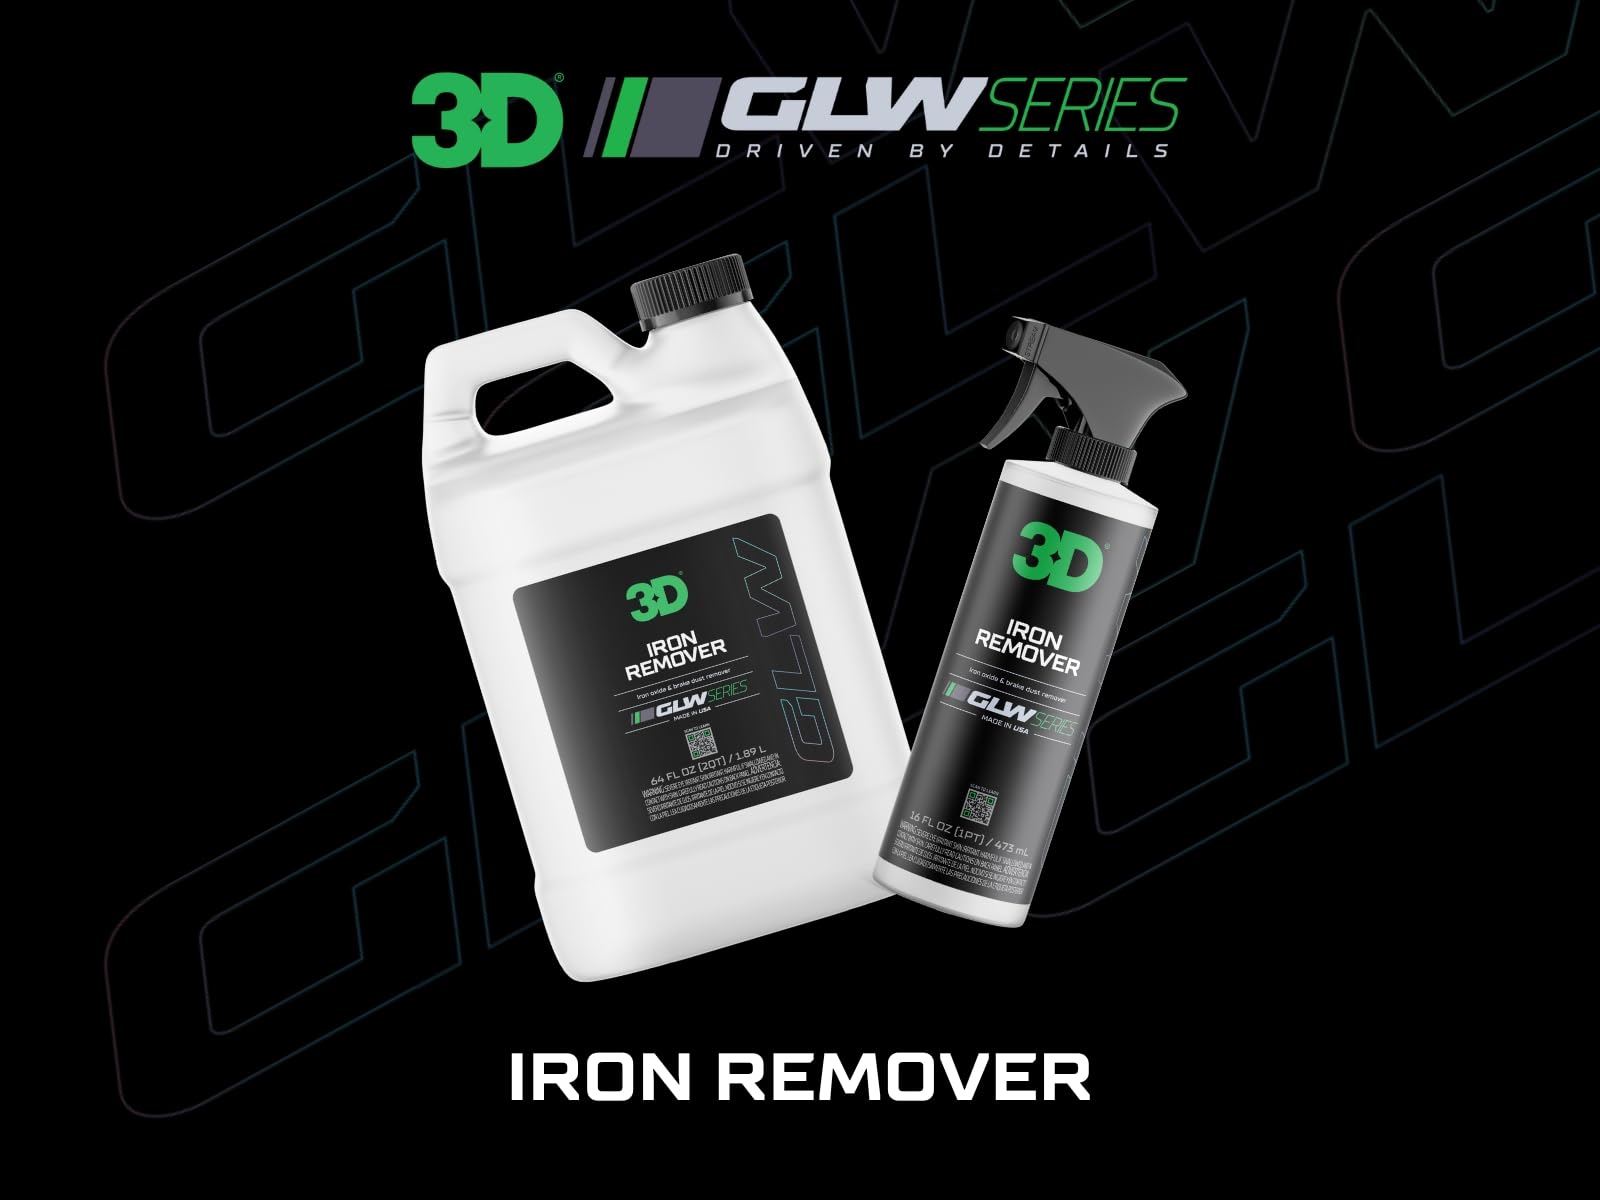 3D Iron Remover GLW Series, DIY Car Detailing